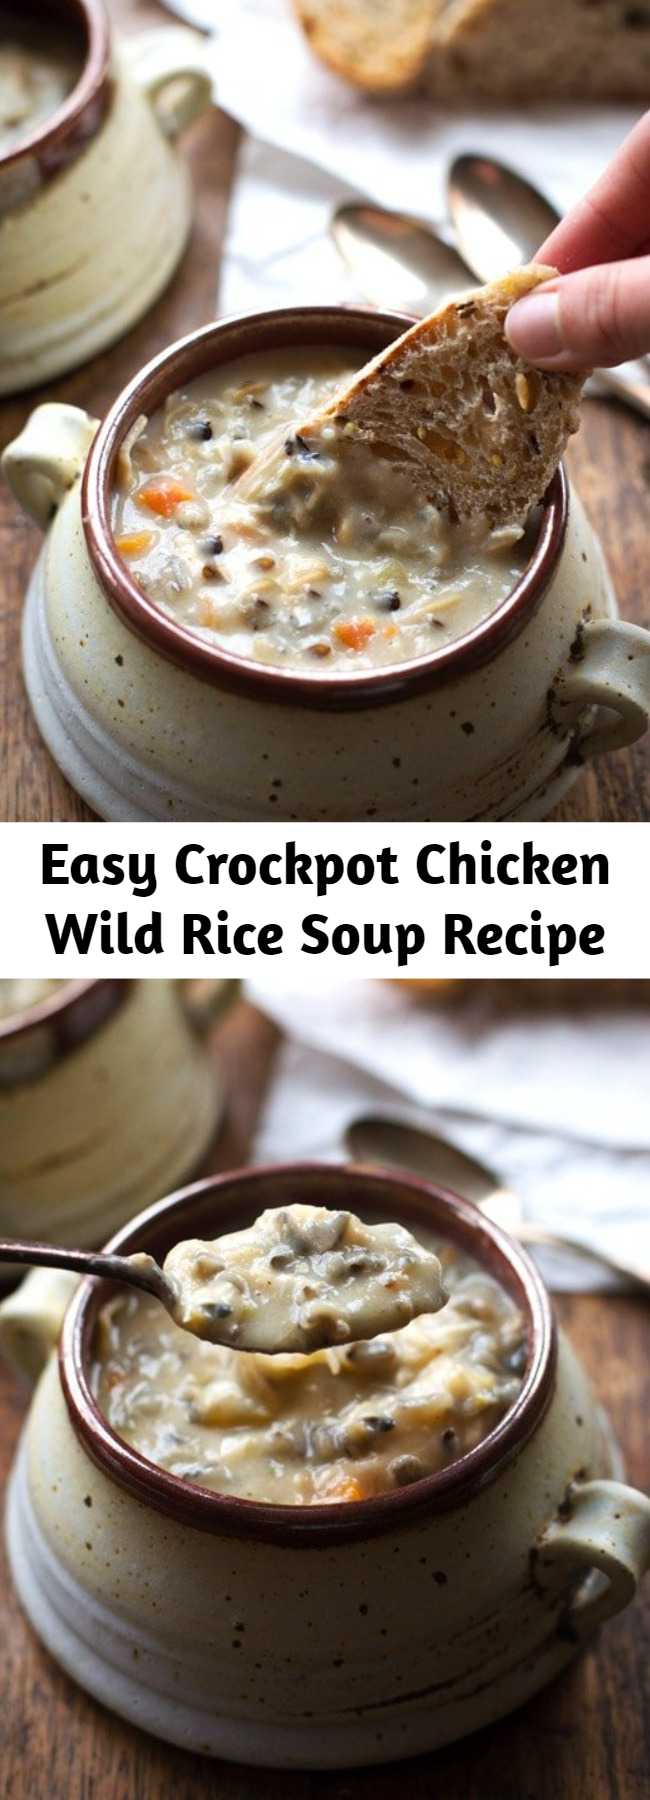 Easy Crockpot Chicken Wild Rice Soup Recipe - This Crockpot Chicken Wild Rice Soup is so darn simple to make and goes perfectly with a piece of crusty bread on a cold winter night. #soup #crockpot #slowcooker #chicken #easy #dinner